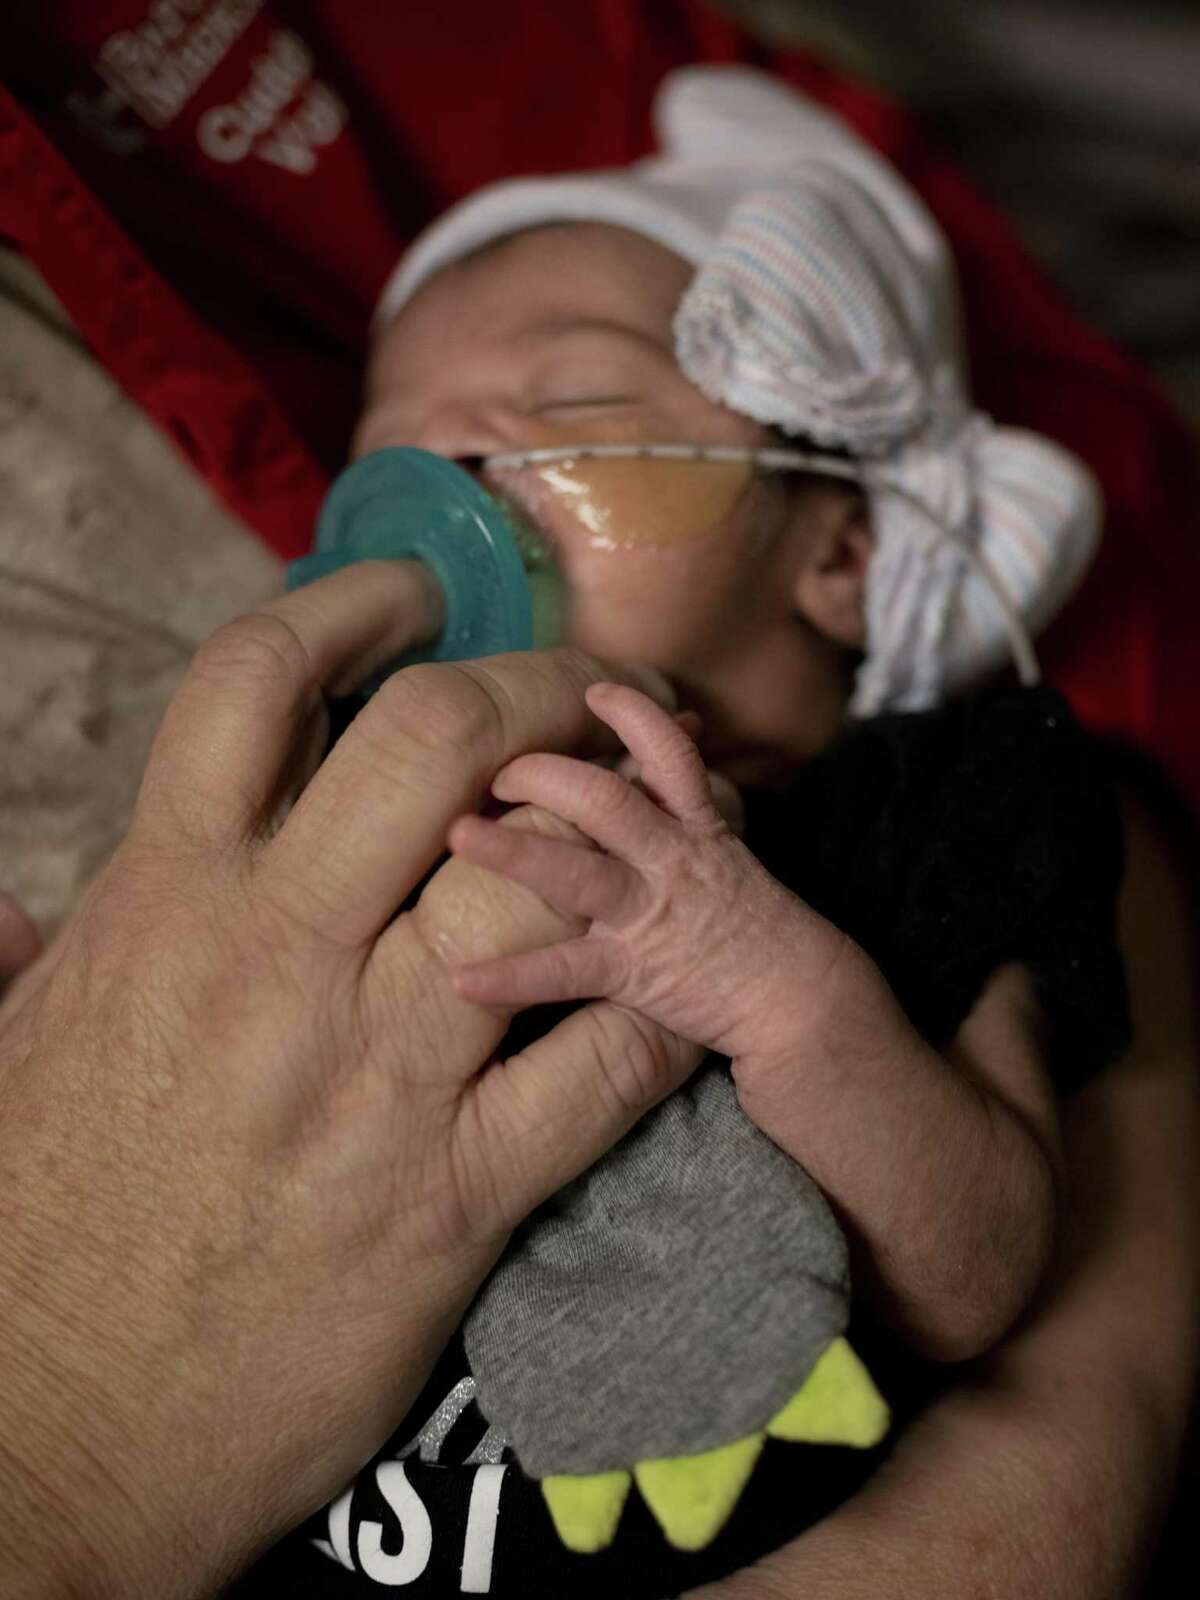 Felicity Cuellar, who was 6 days old, rests peacefully in the arms of Peggy Smith, a volunteer cuddler in the neonatal intensive care unit at Baptist Medical Center on Nov. 13, 2018. The cuddlers are specially trained volunteers who help soothe babies who were born prematurely or are recovering from neonatal abstinence syndrome.